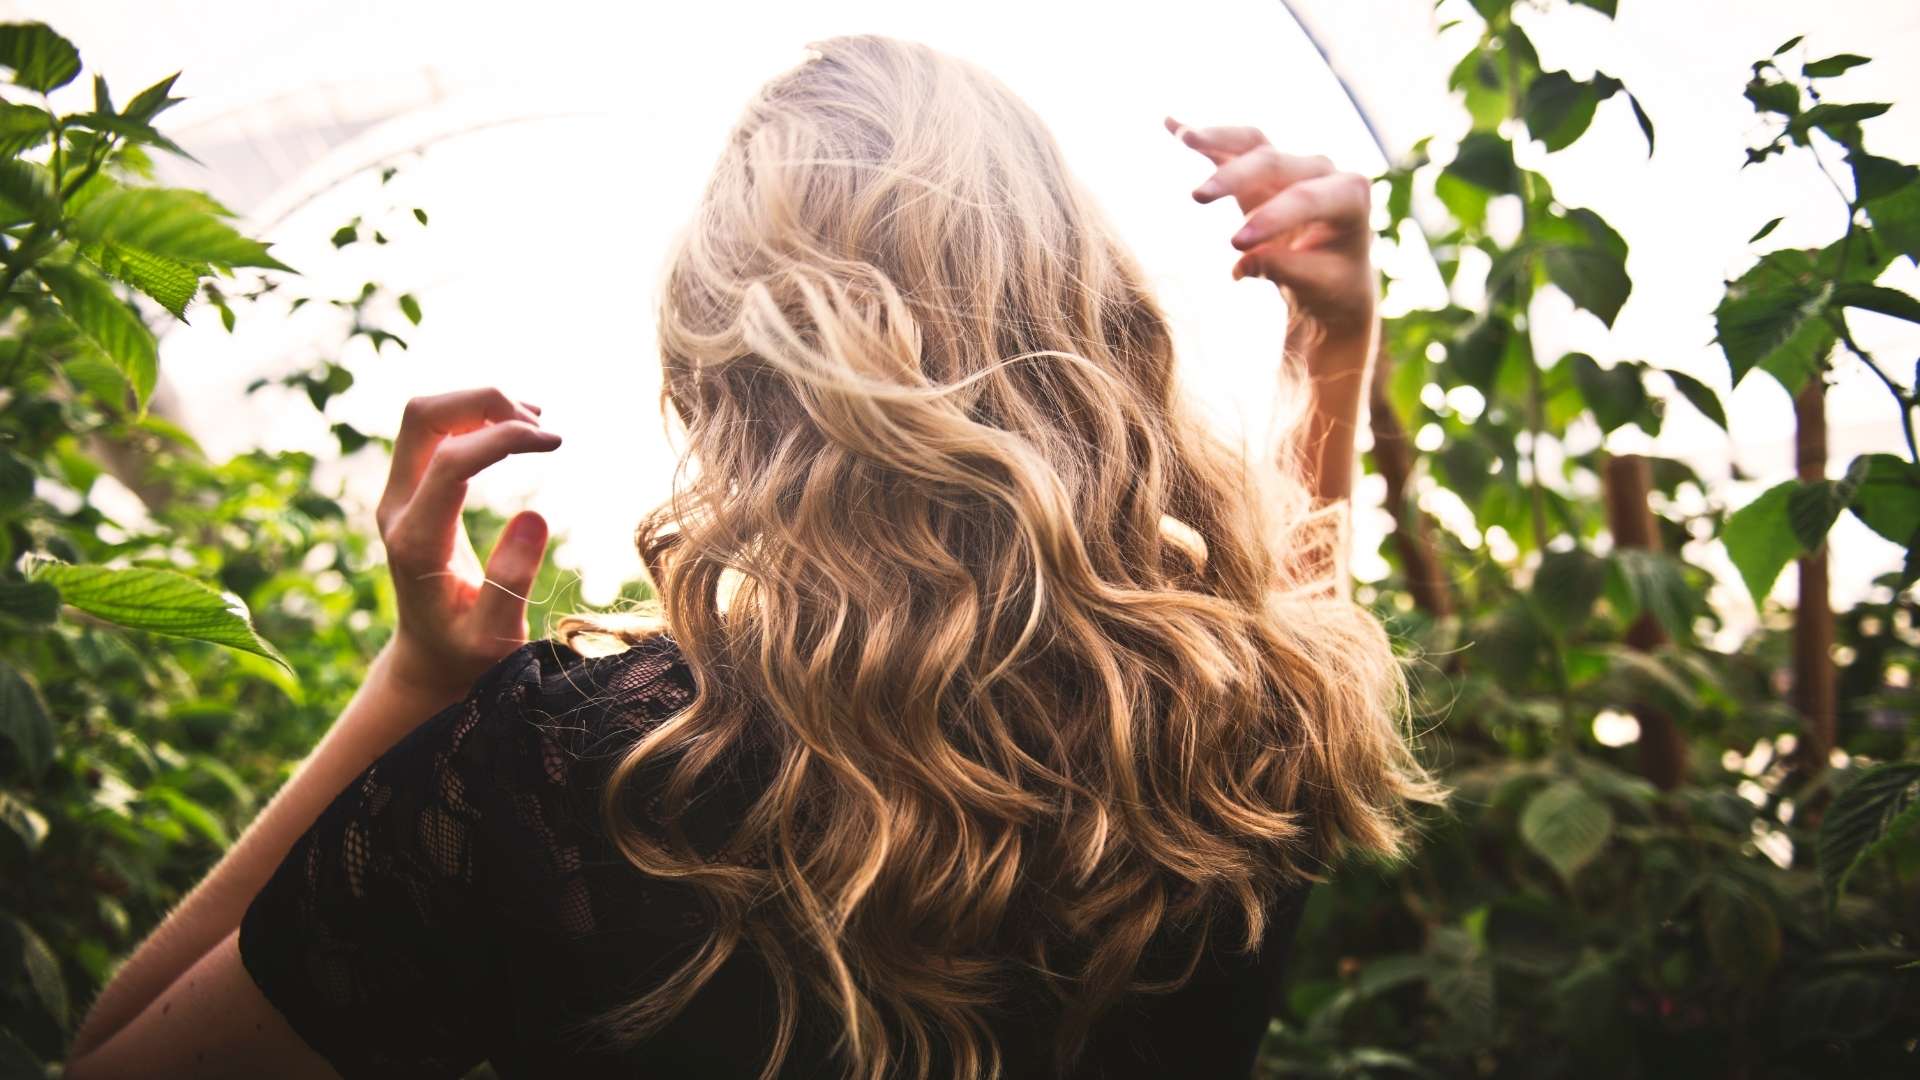 What Are the Common Causes of Damaged Hair?